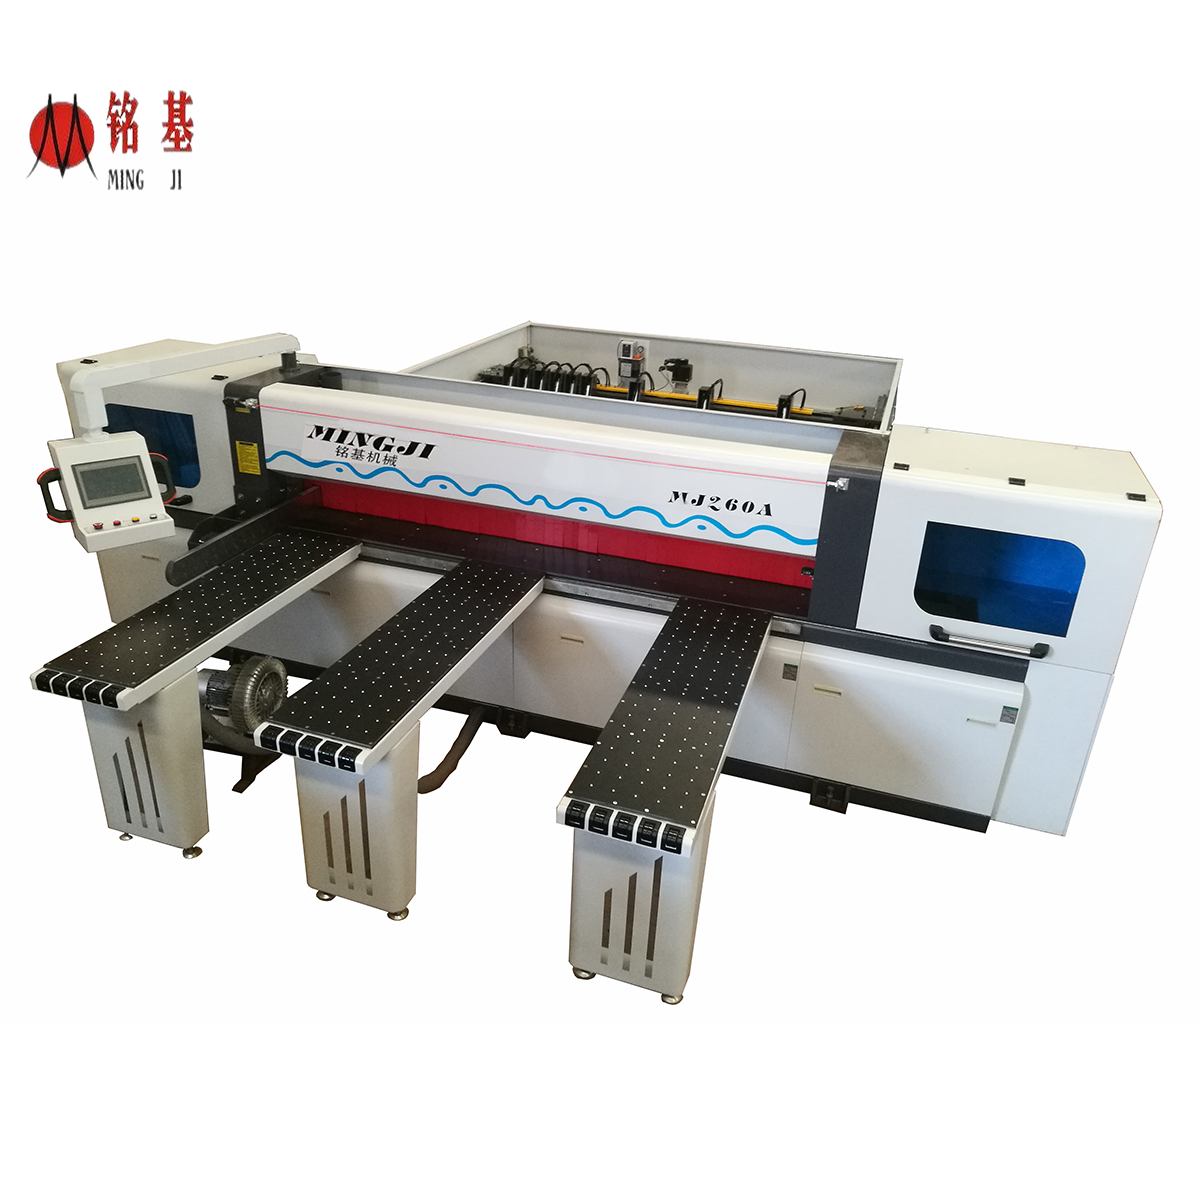 Which one is better? CNC panel saw compare or manual sliding table saw